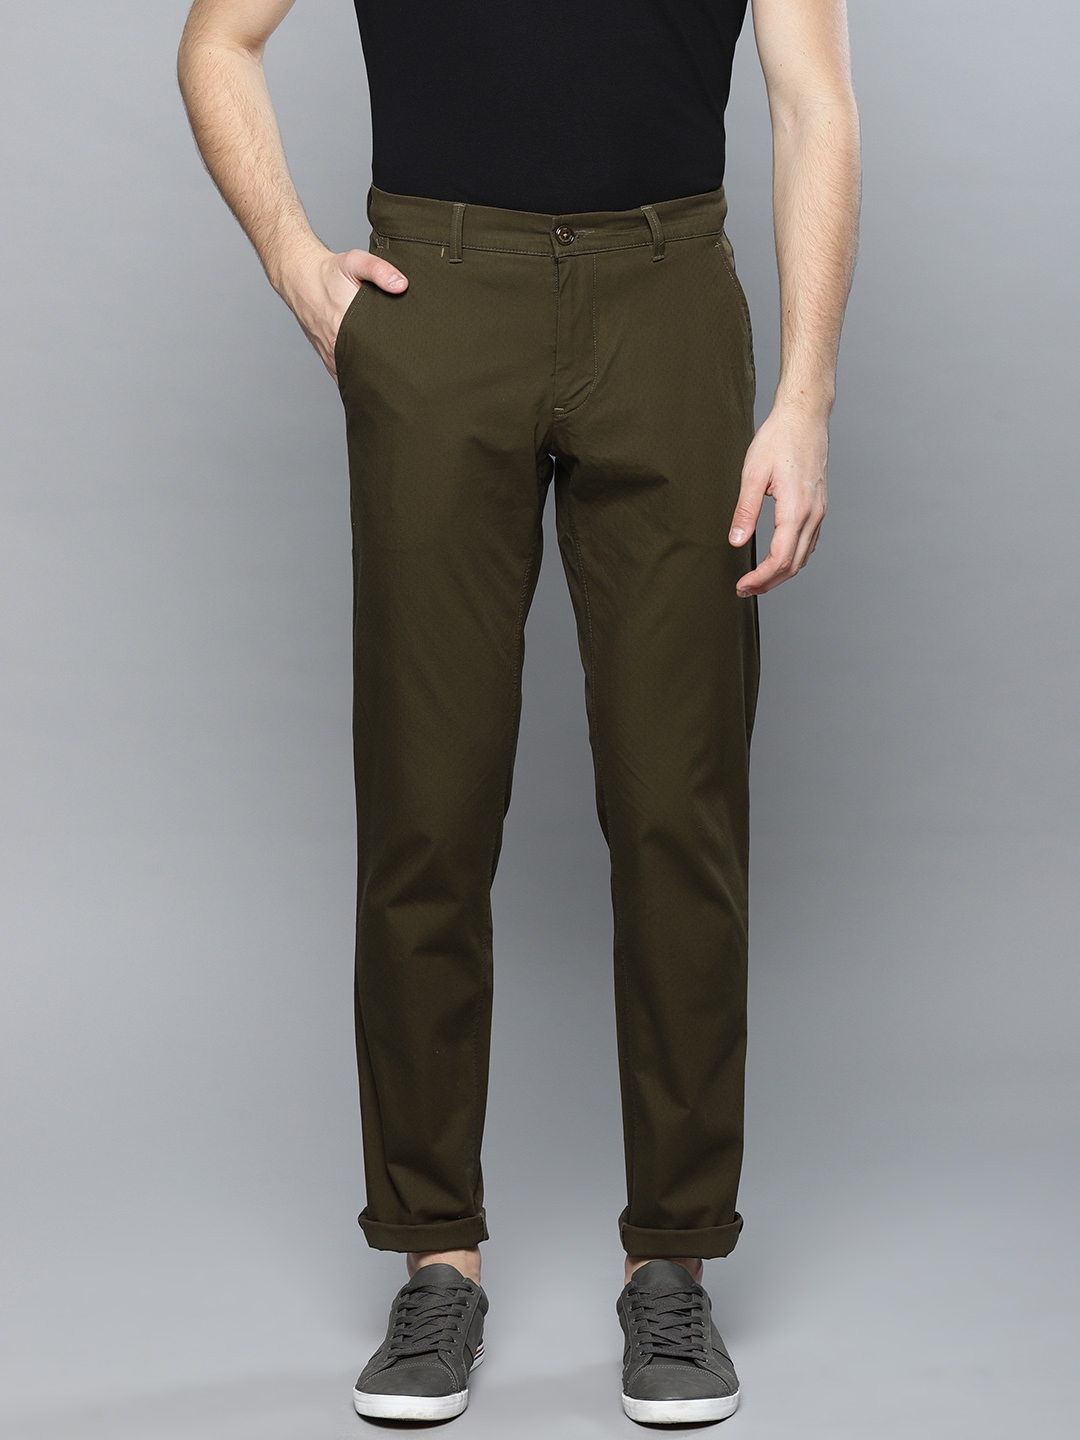 Buy Louis Philippe Grey Trousers Online  755723  Louis Philippe